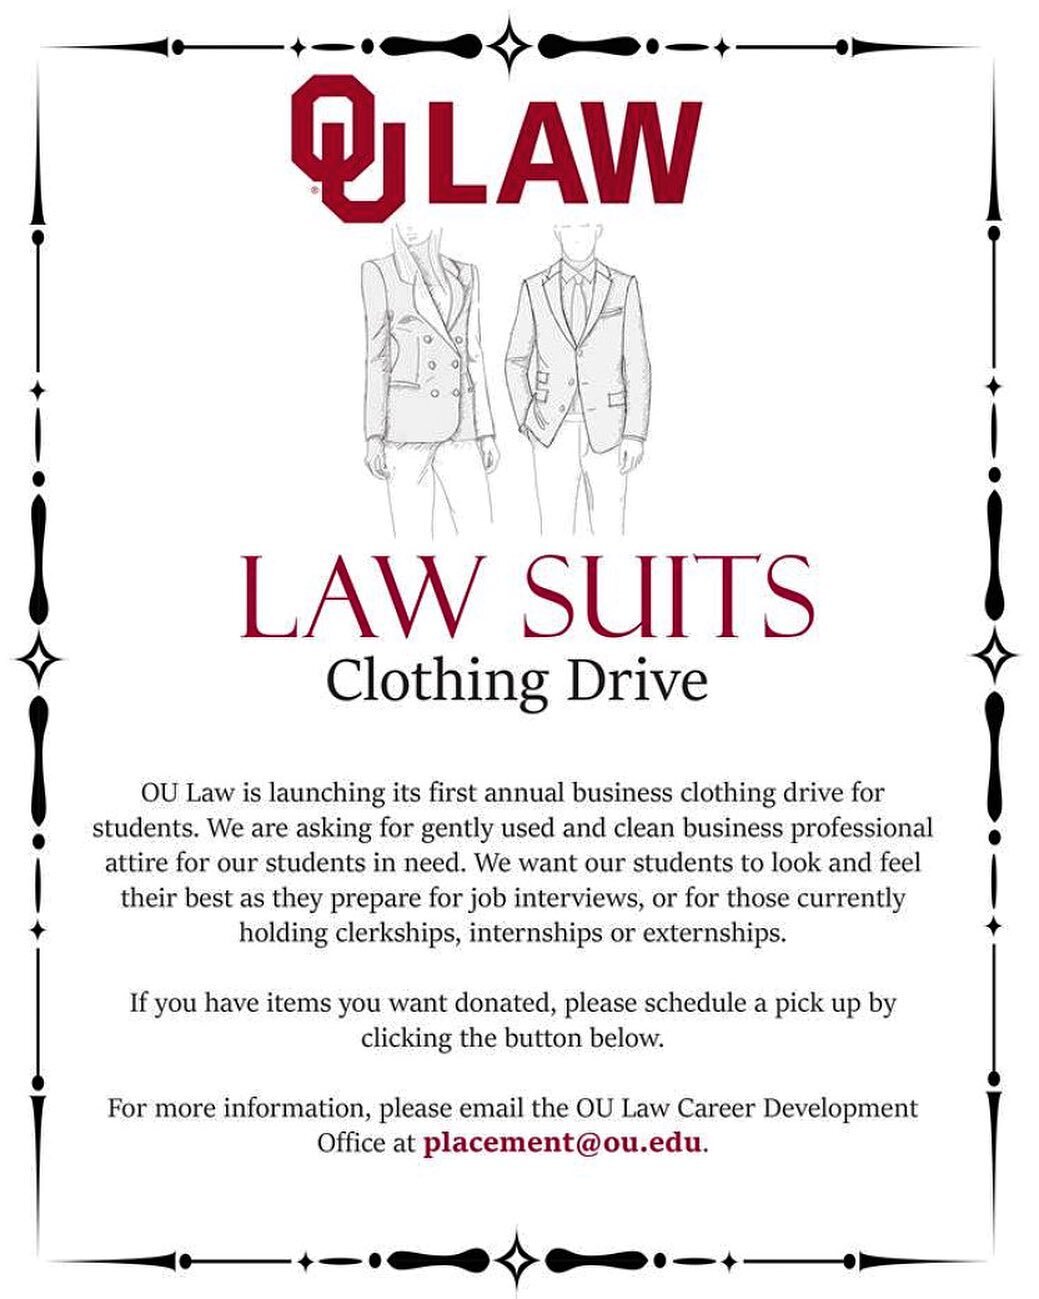 Donations accepted for Clothing Drive suiting up students at OU. ❤️🤍